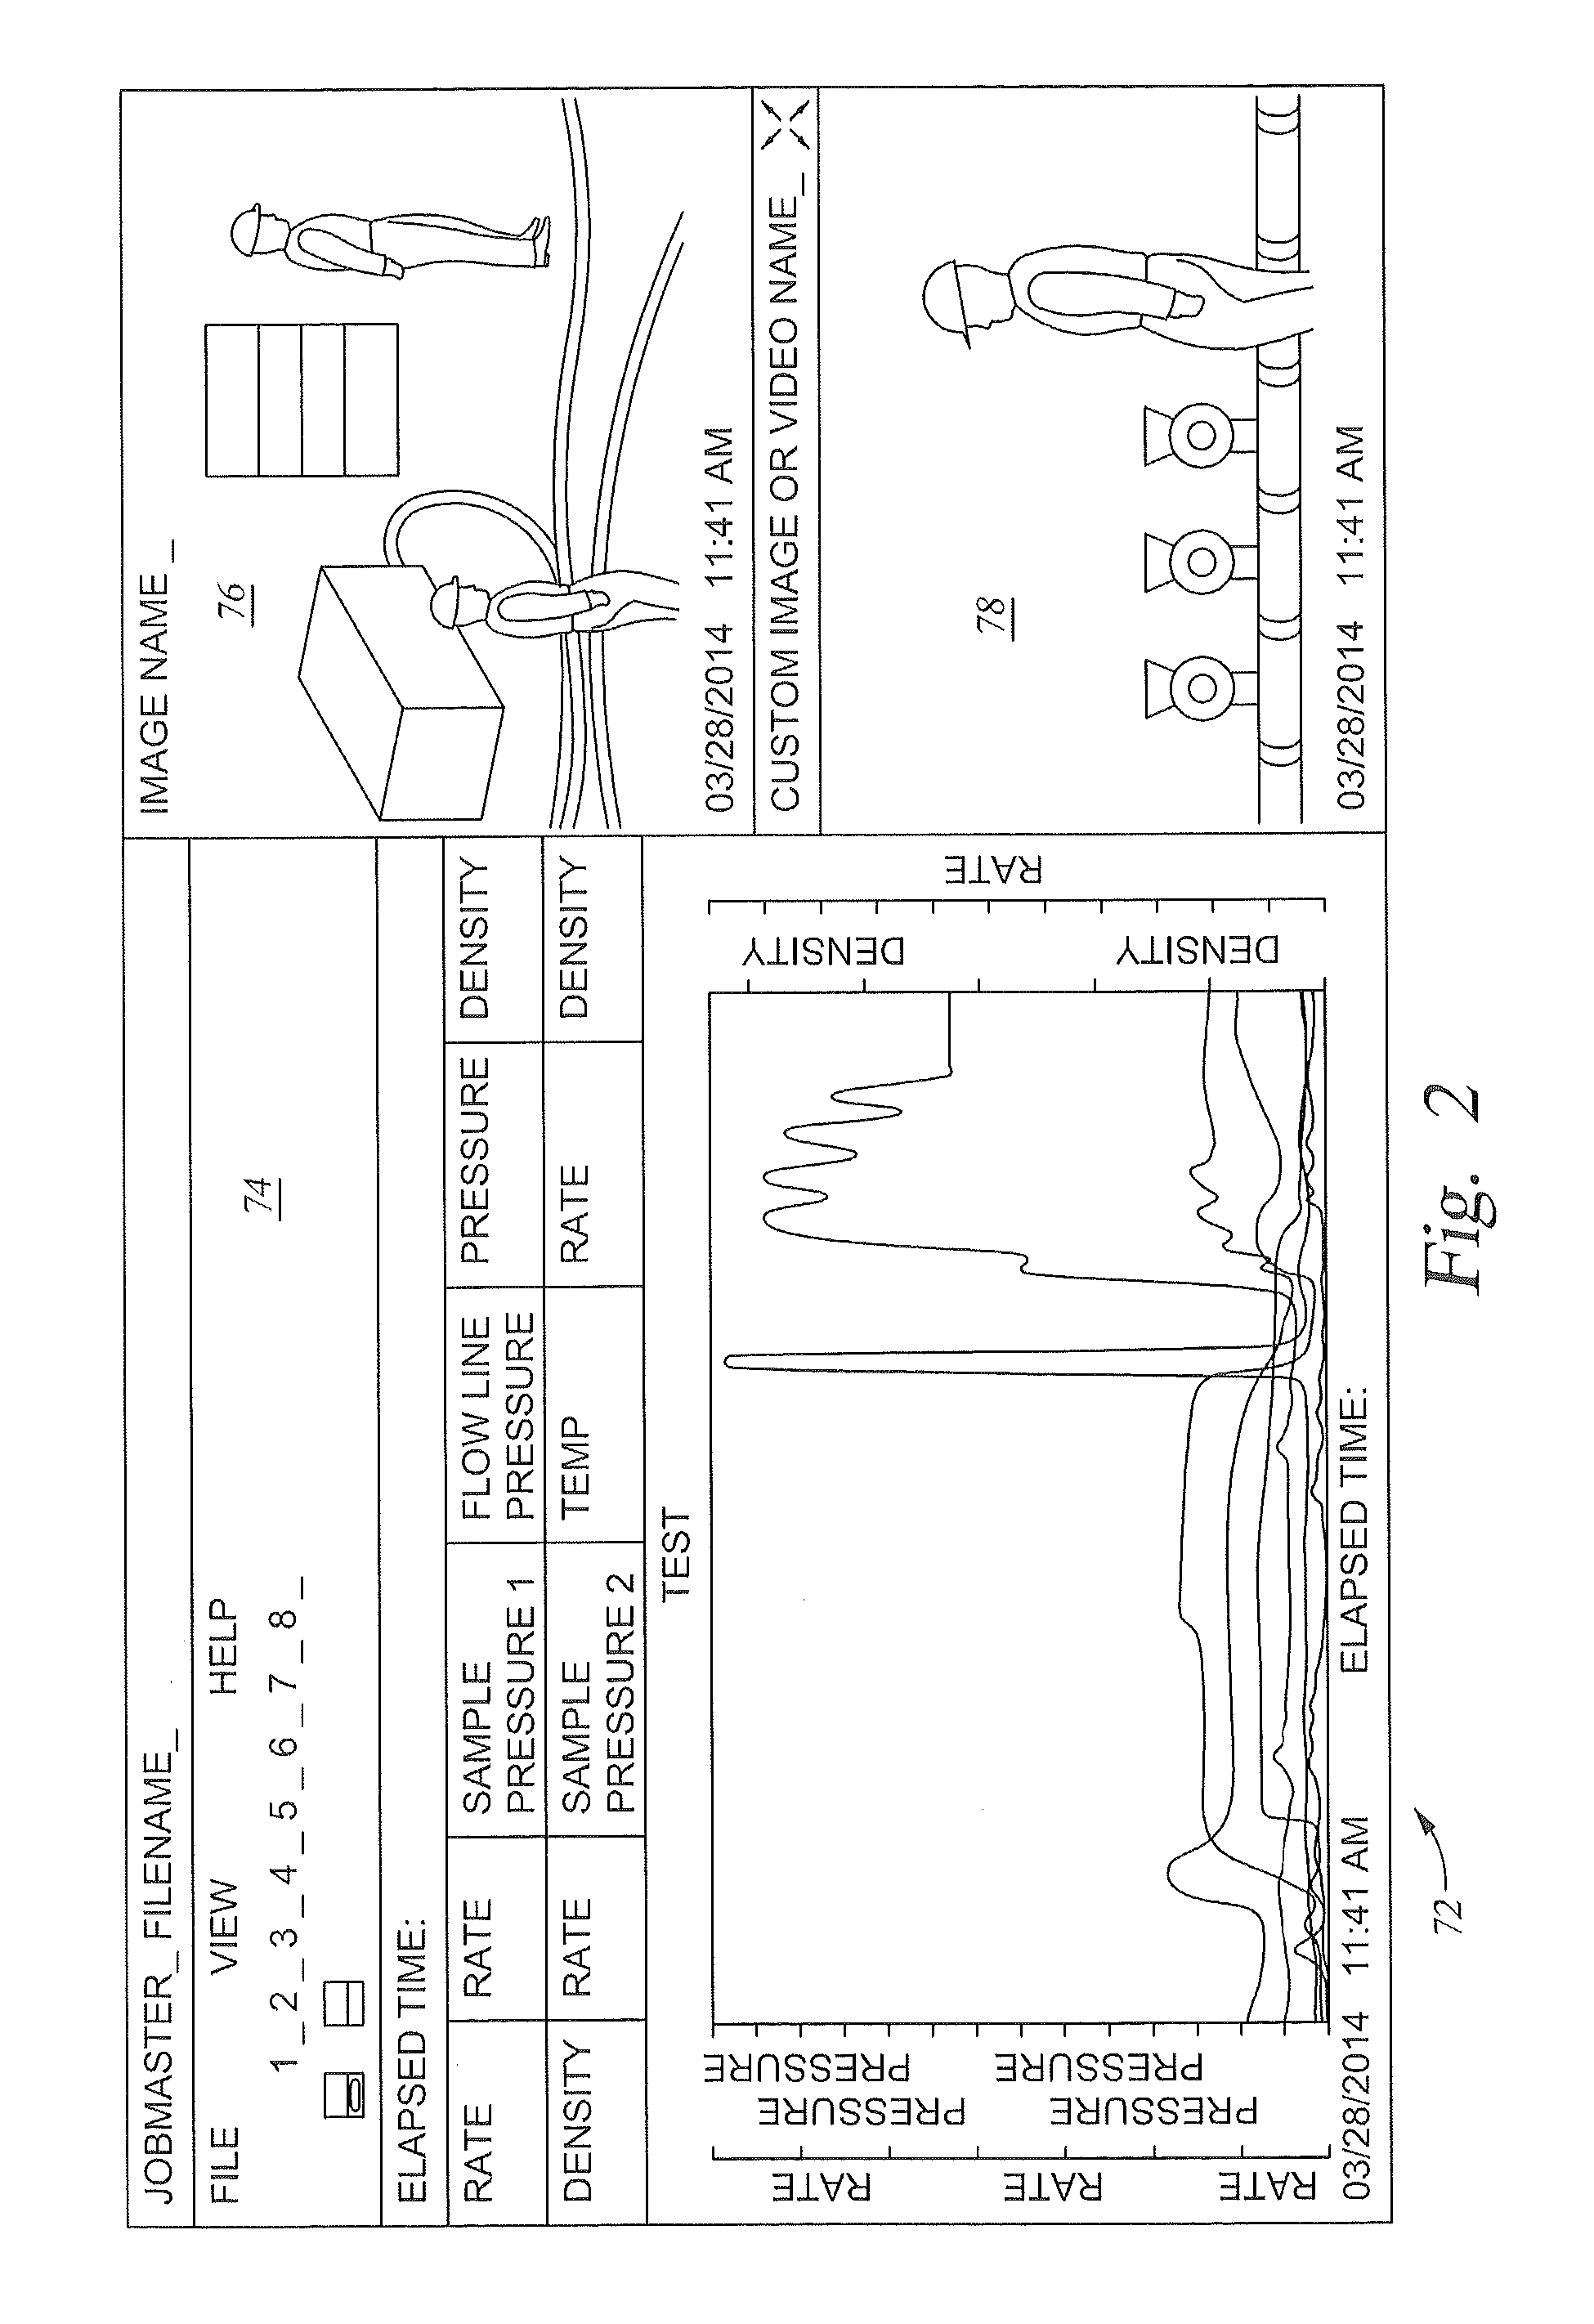 Method of and system for remote diagnostics of an operational system